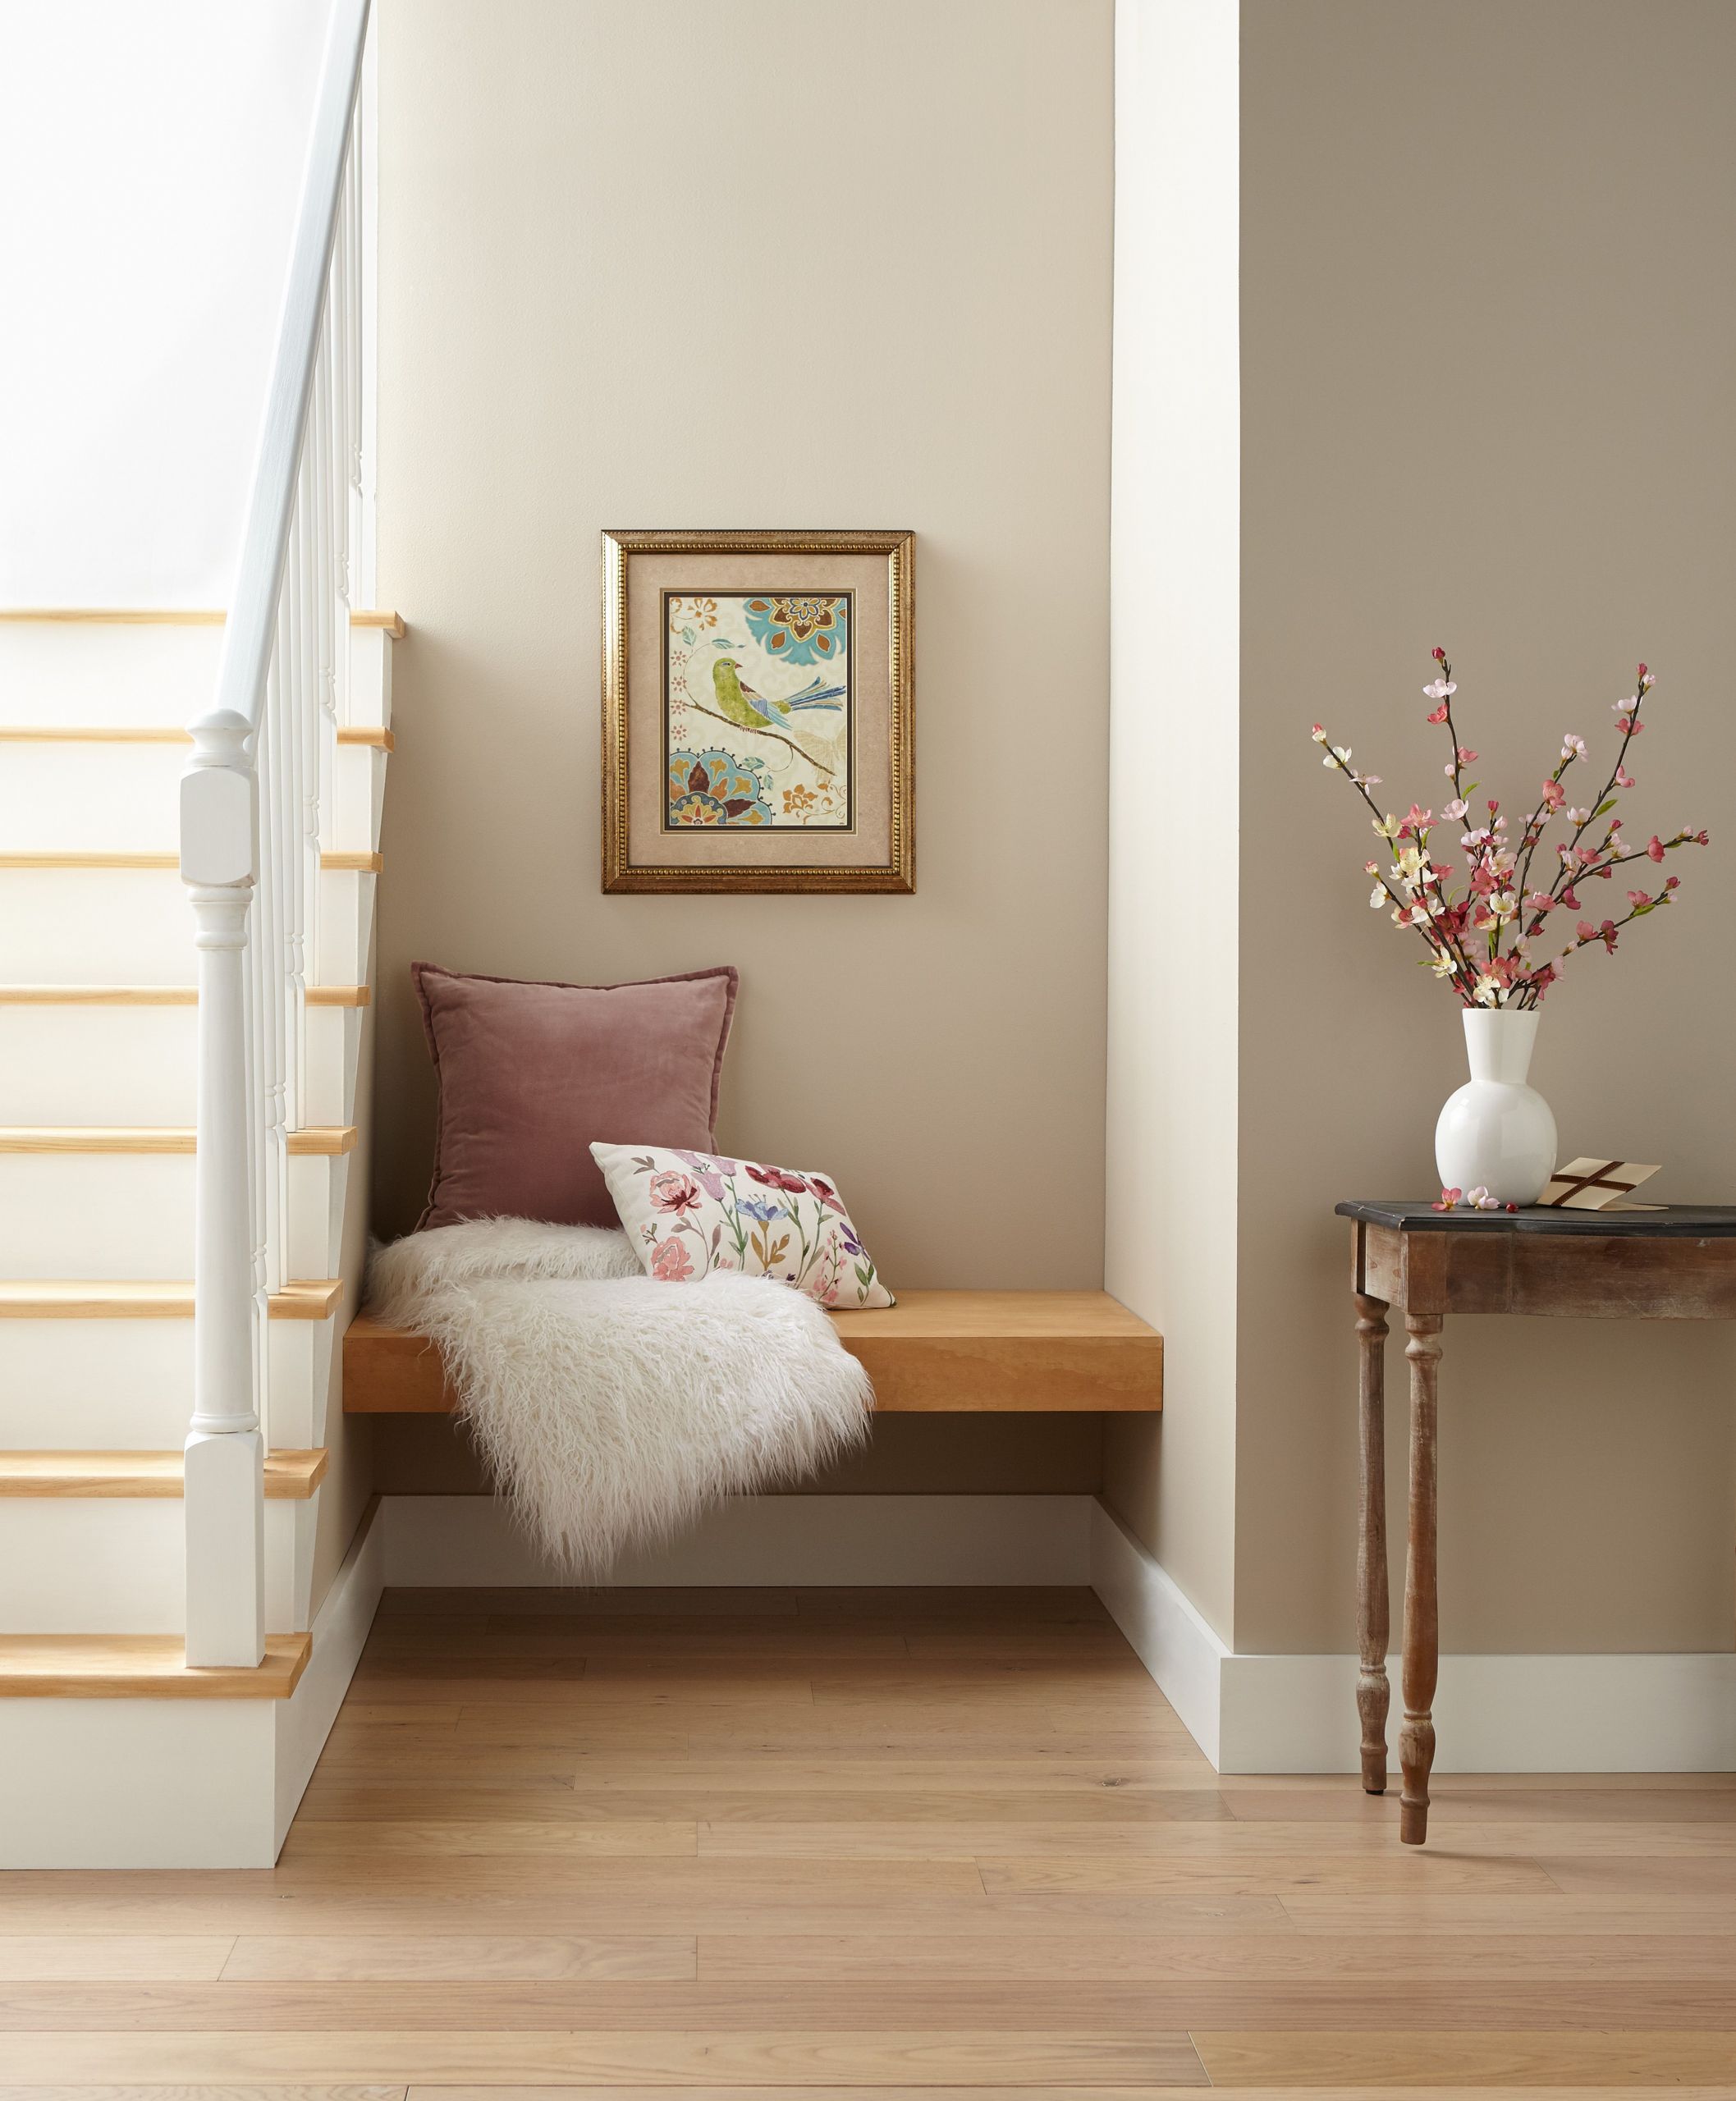 Bedroom Color Trends 2020
 These Are the Paint Color Trends for 2020 According to Behr